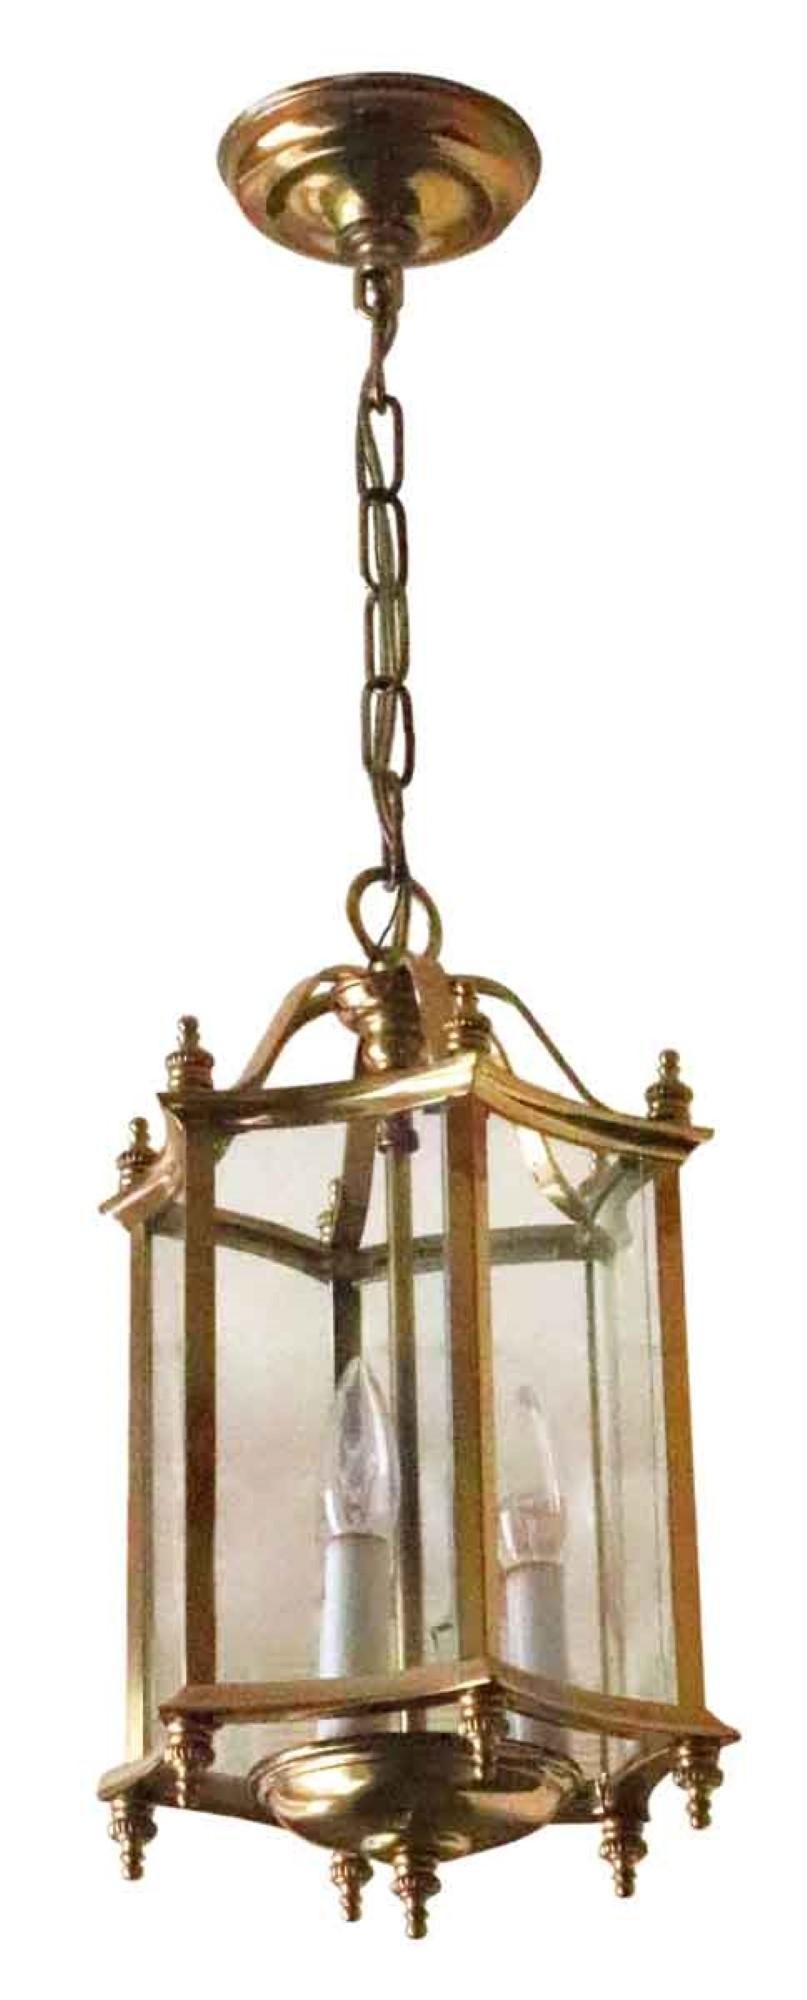 1980s brass frame hexagon lantern pendant light with concave glass. From the vestibules of suites in the towers of the NYC Waldorf Astoria Hotel. Waldorf Astoria authenticity card included with your purchase. Priced each.